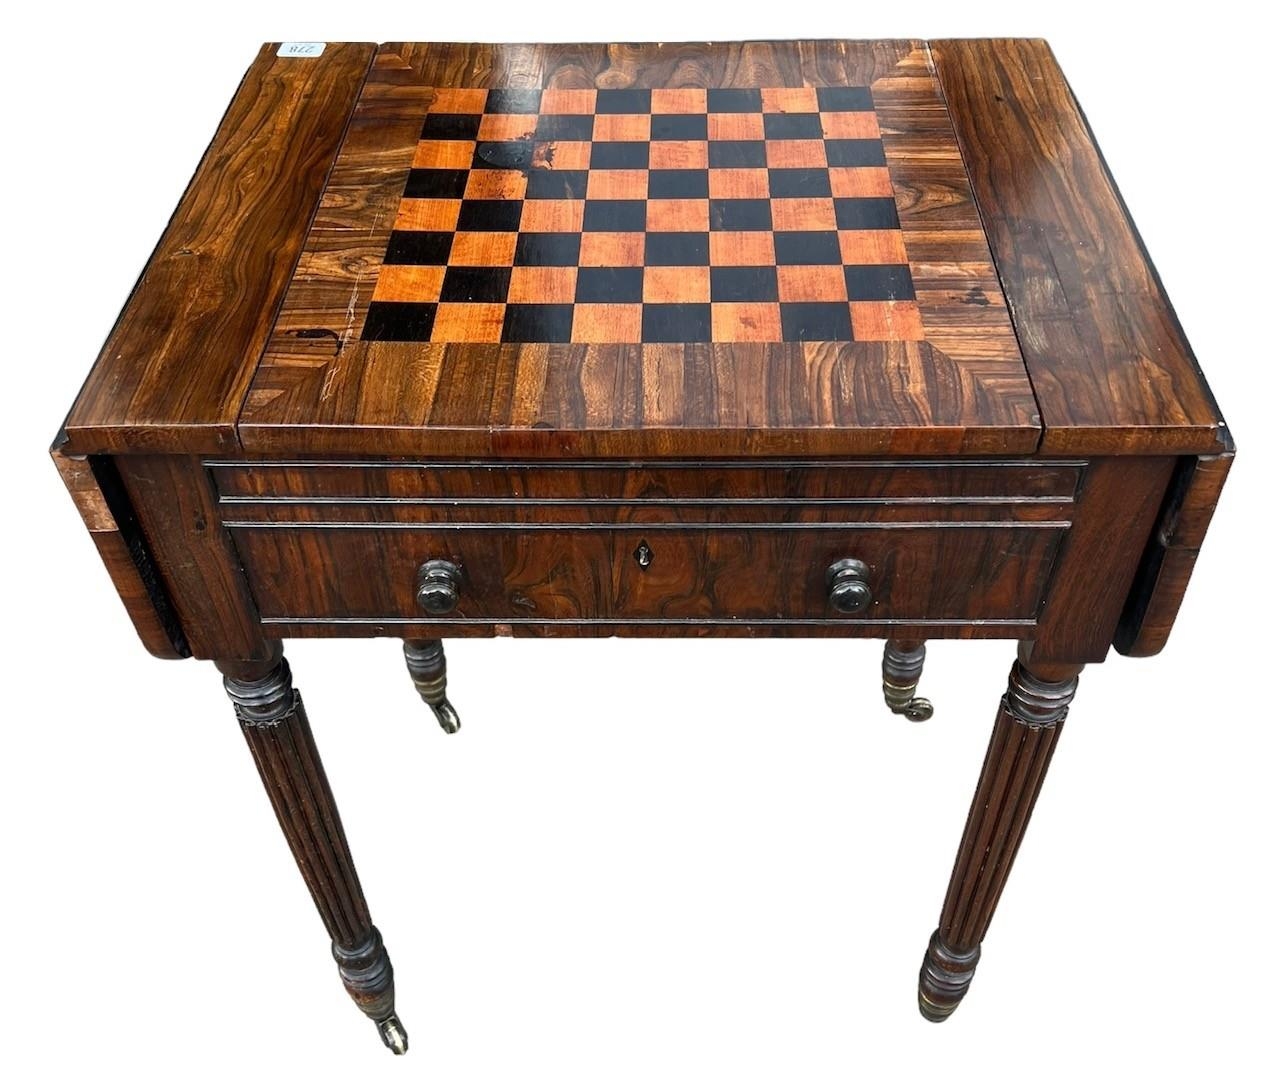 MANNER OF GILLOWS, AN EARLY 19TH CENTURY DROP FLAP GONCALO ALVES CHESS GAME TABLE The sliding - Bild 6 aus 10